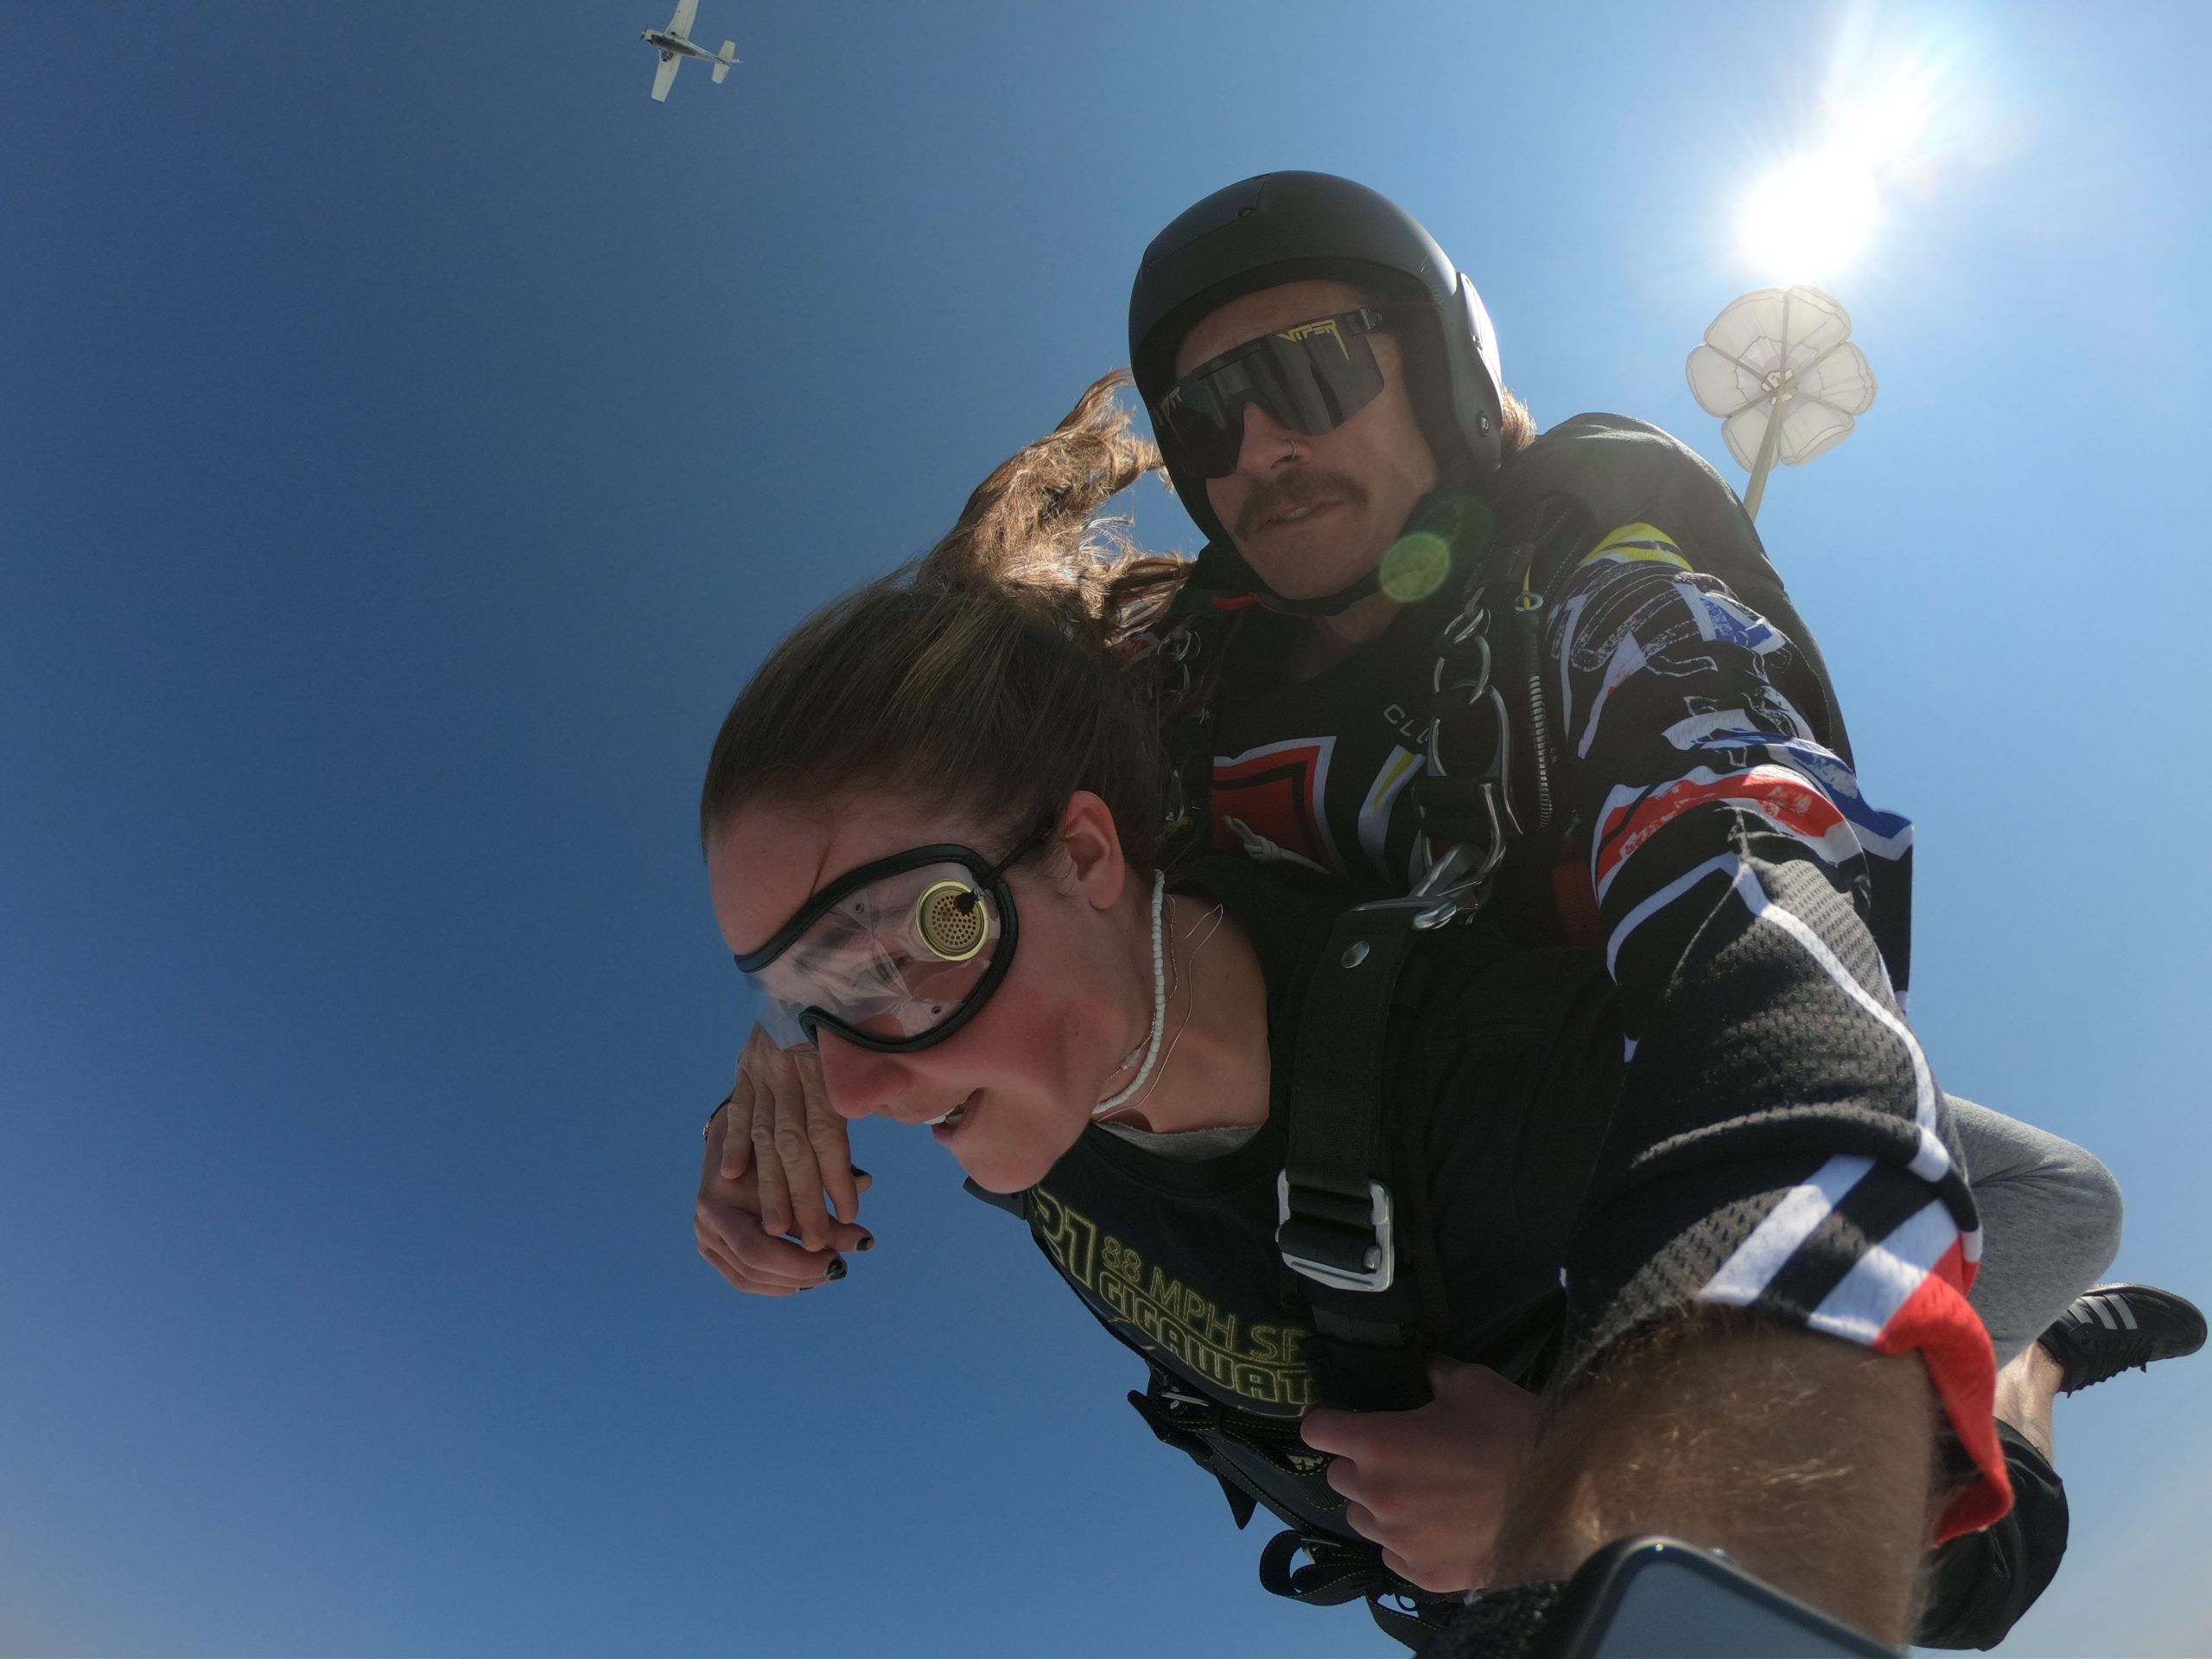 Instructor Andrew Leith in freefall during a tandem skydive at Wisconsin Skydiving Center near Madison